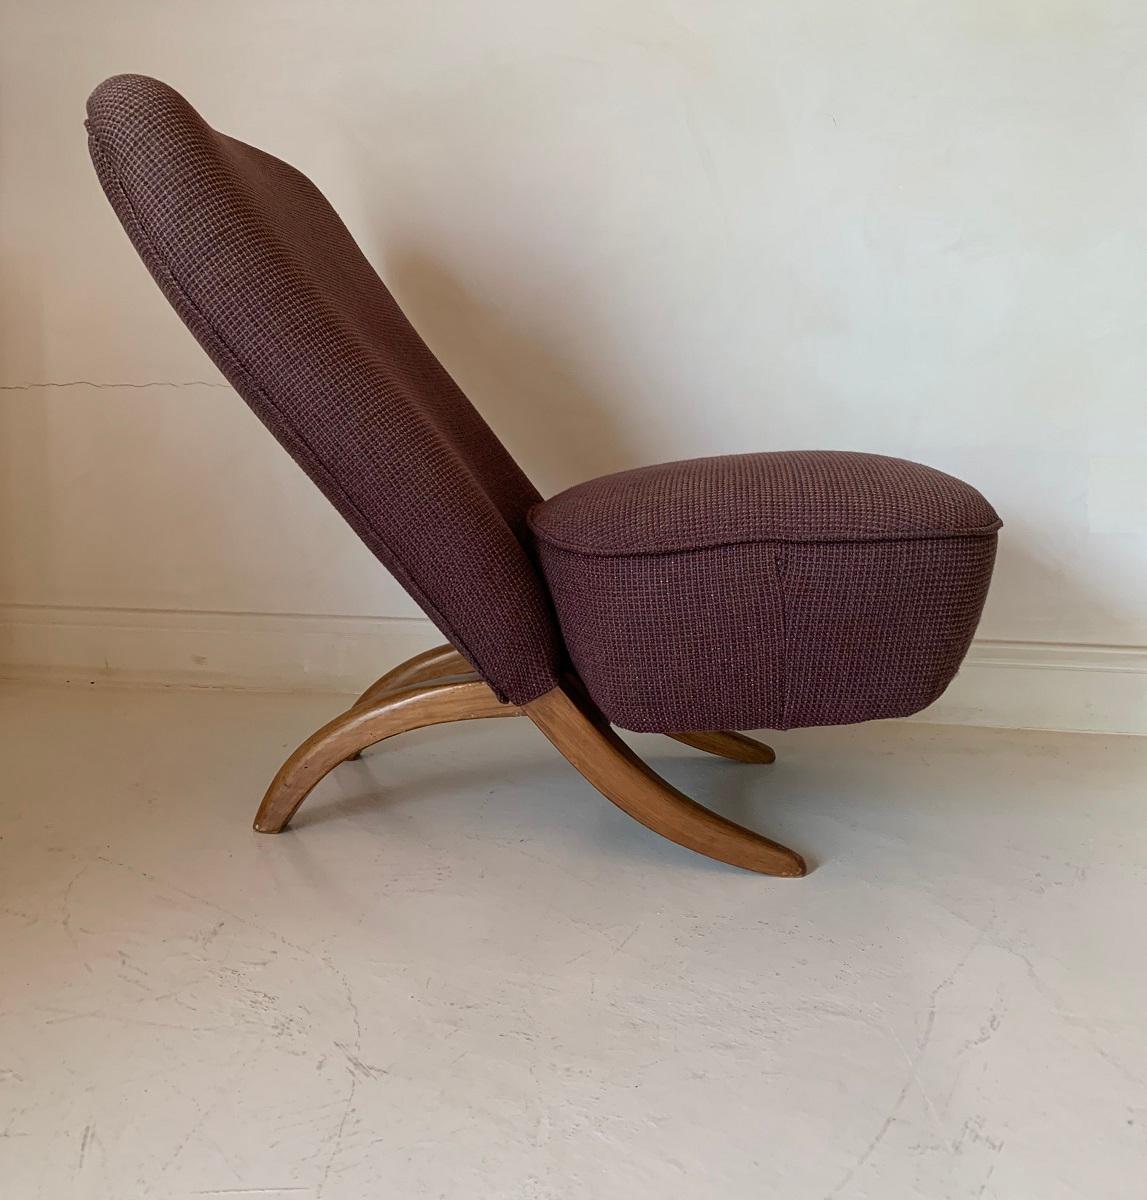 A good 1950s Congo chair by Theo Ruth for Artifort. Artifort was founded in 1890 and still exist. Starting out as a Classic seating company they soon attracted modern designers to colaborate with.
Theo Ruth was a pecculiar case. Hired as a